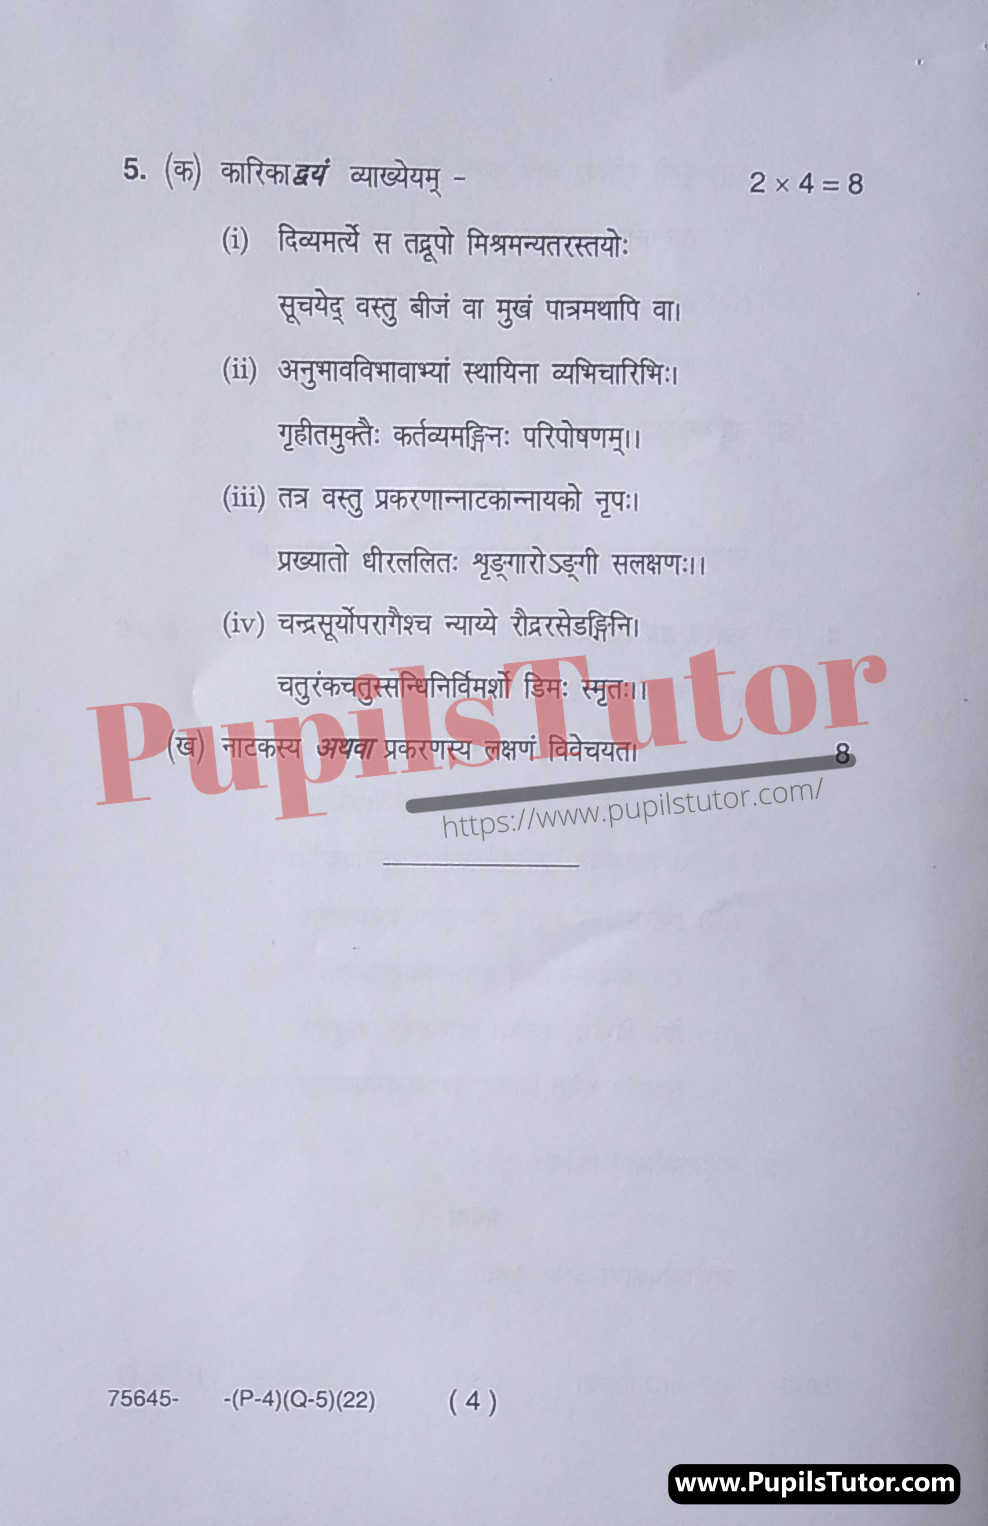 MDU (Maharshi Dayanand University, Rohtak Haryana) CBCS Scheme (M.A. [Sanskrit] – Master of Arts) Natya Shastra Important Questions Of February, 2022 Exam PDF Download Free (Page 4)